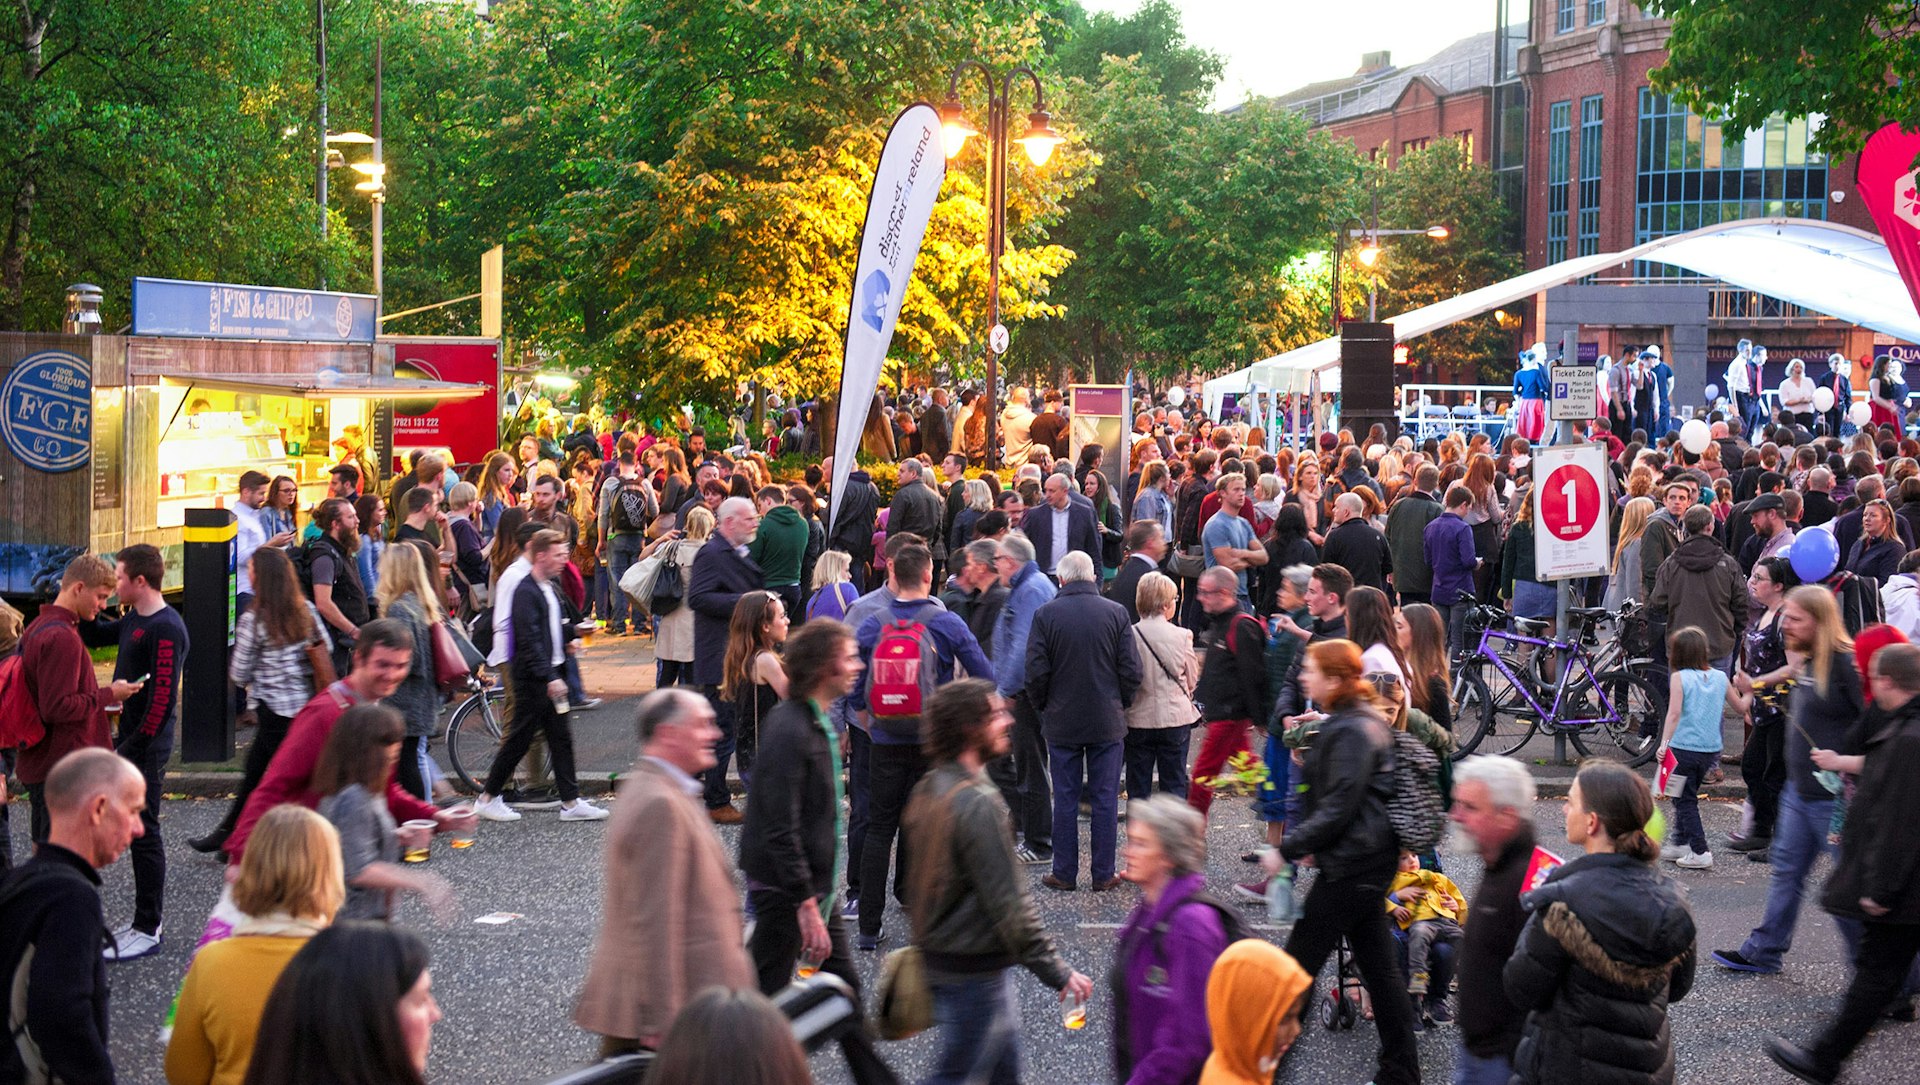 A crowd of over 60,000 revelers attends the Cathedral Quarter Arts Festival. Image by David in Lisburn / CC BY 2.0